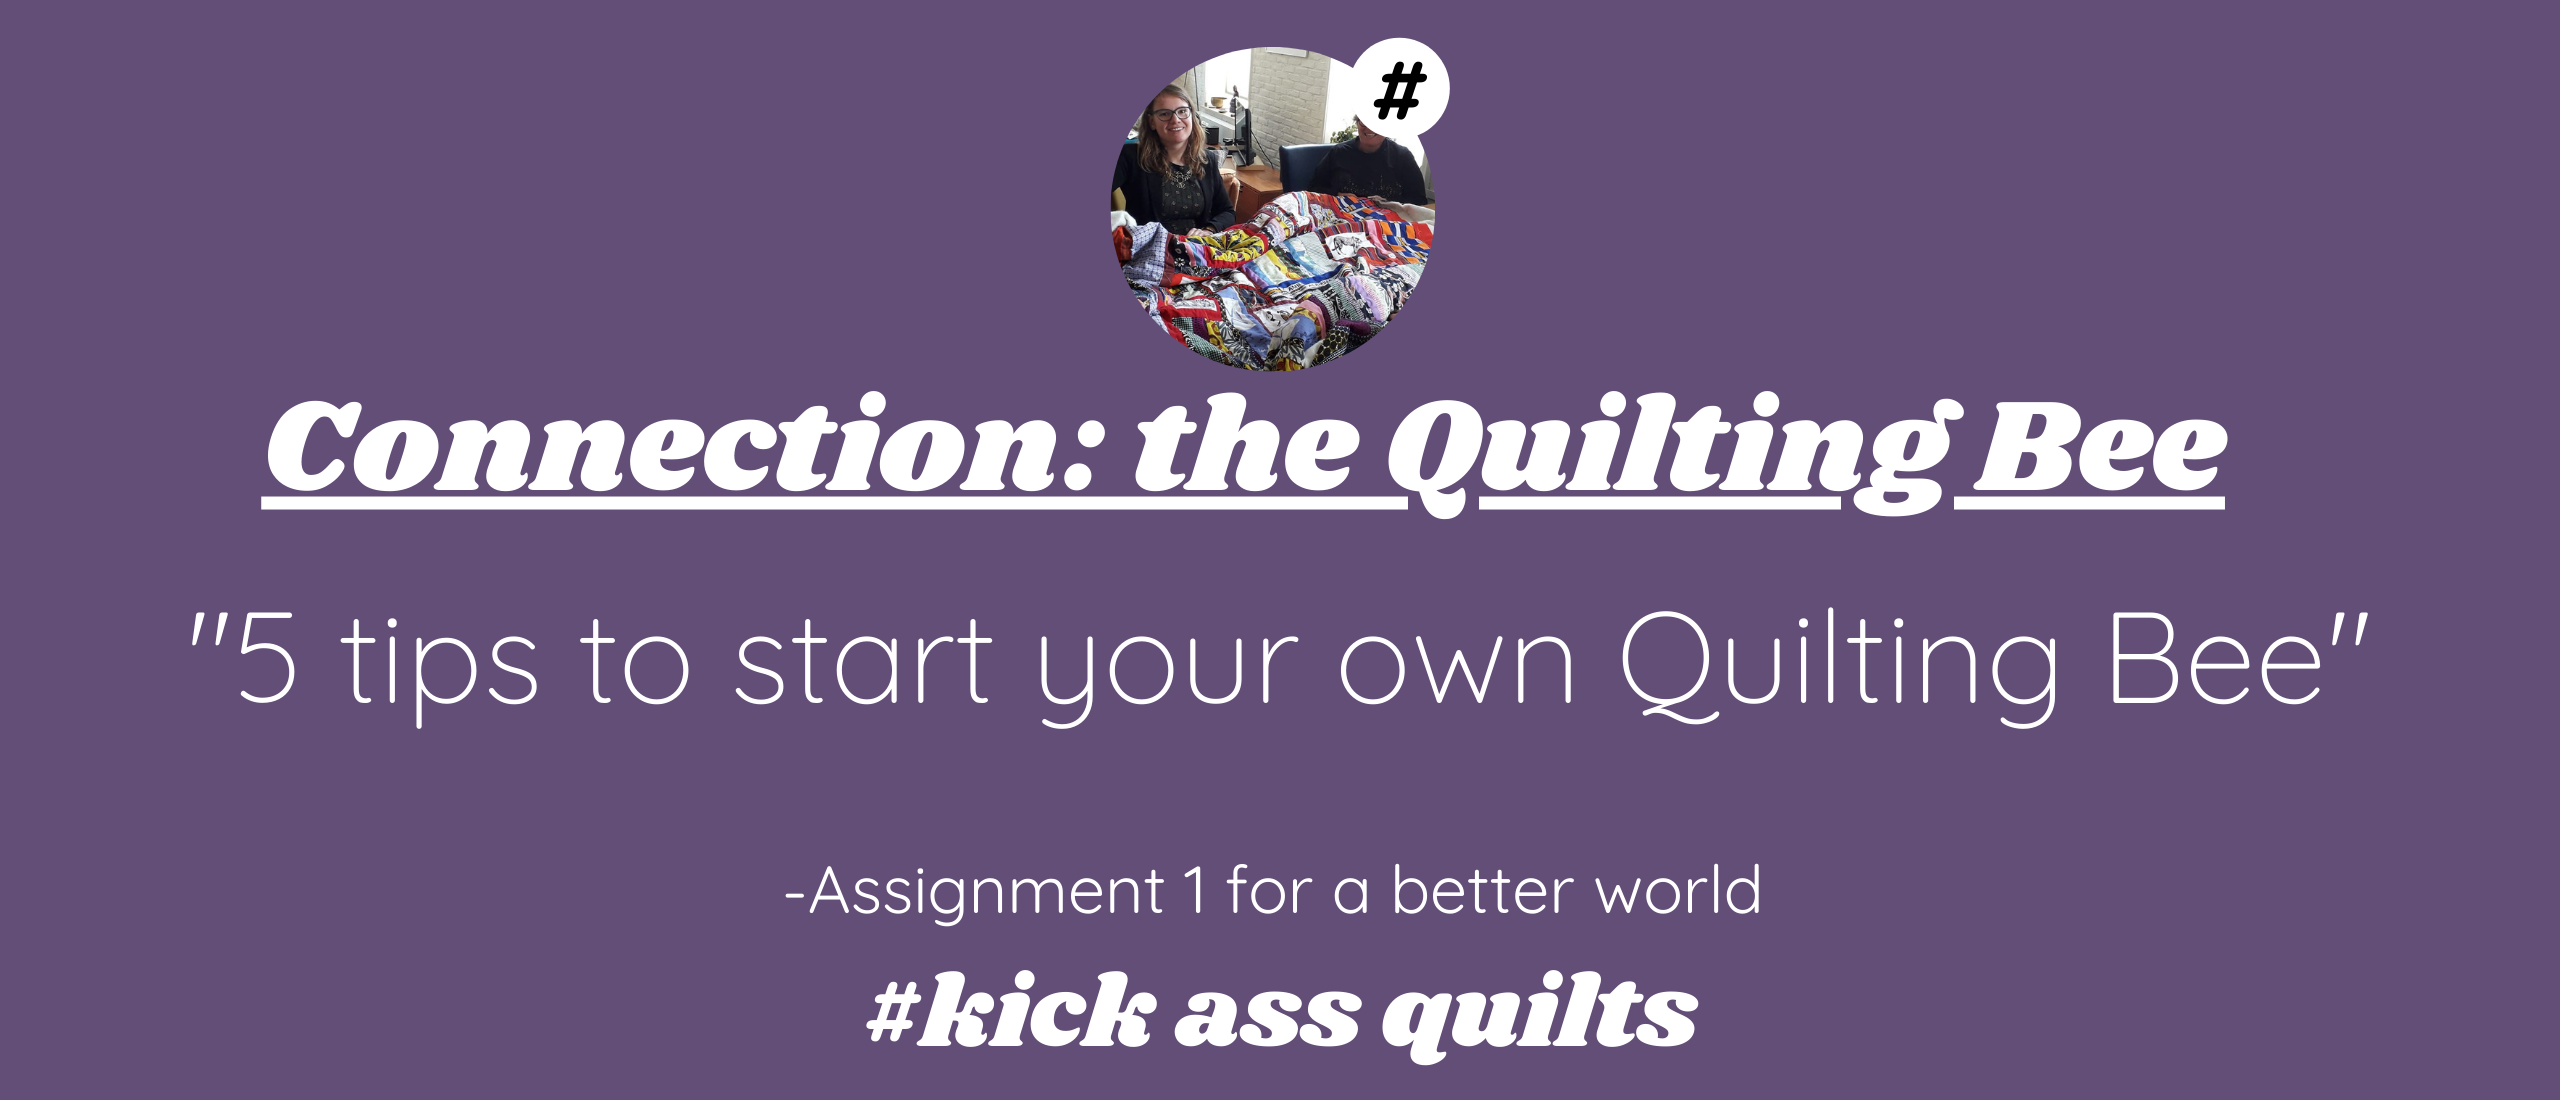 5 steps to start your own quilting bee - Assignment 1 | Weekly Inspiration #11